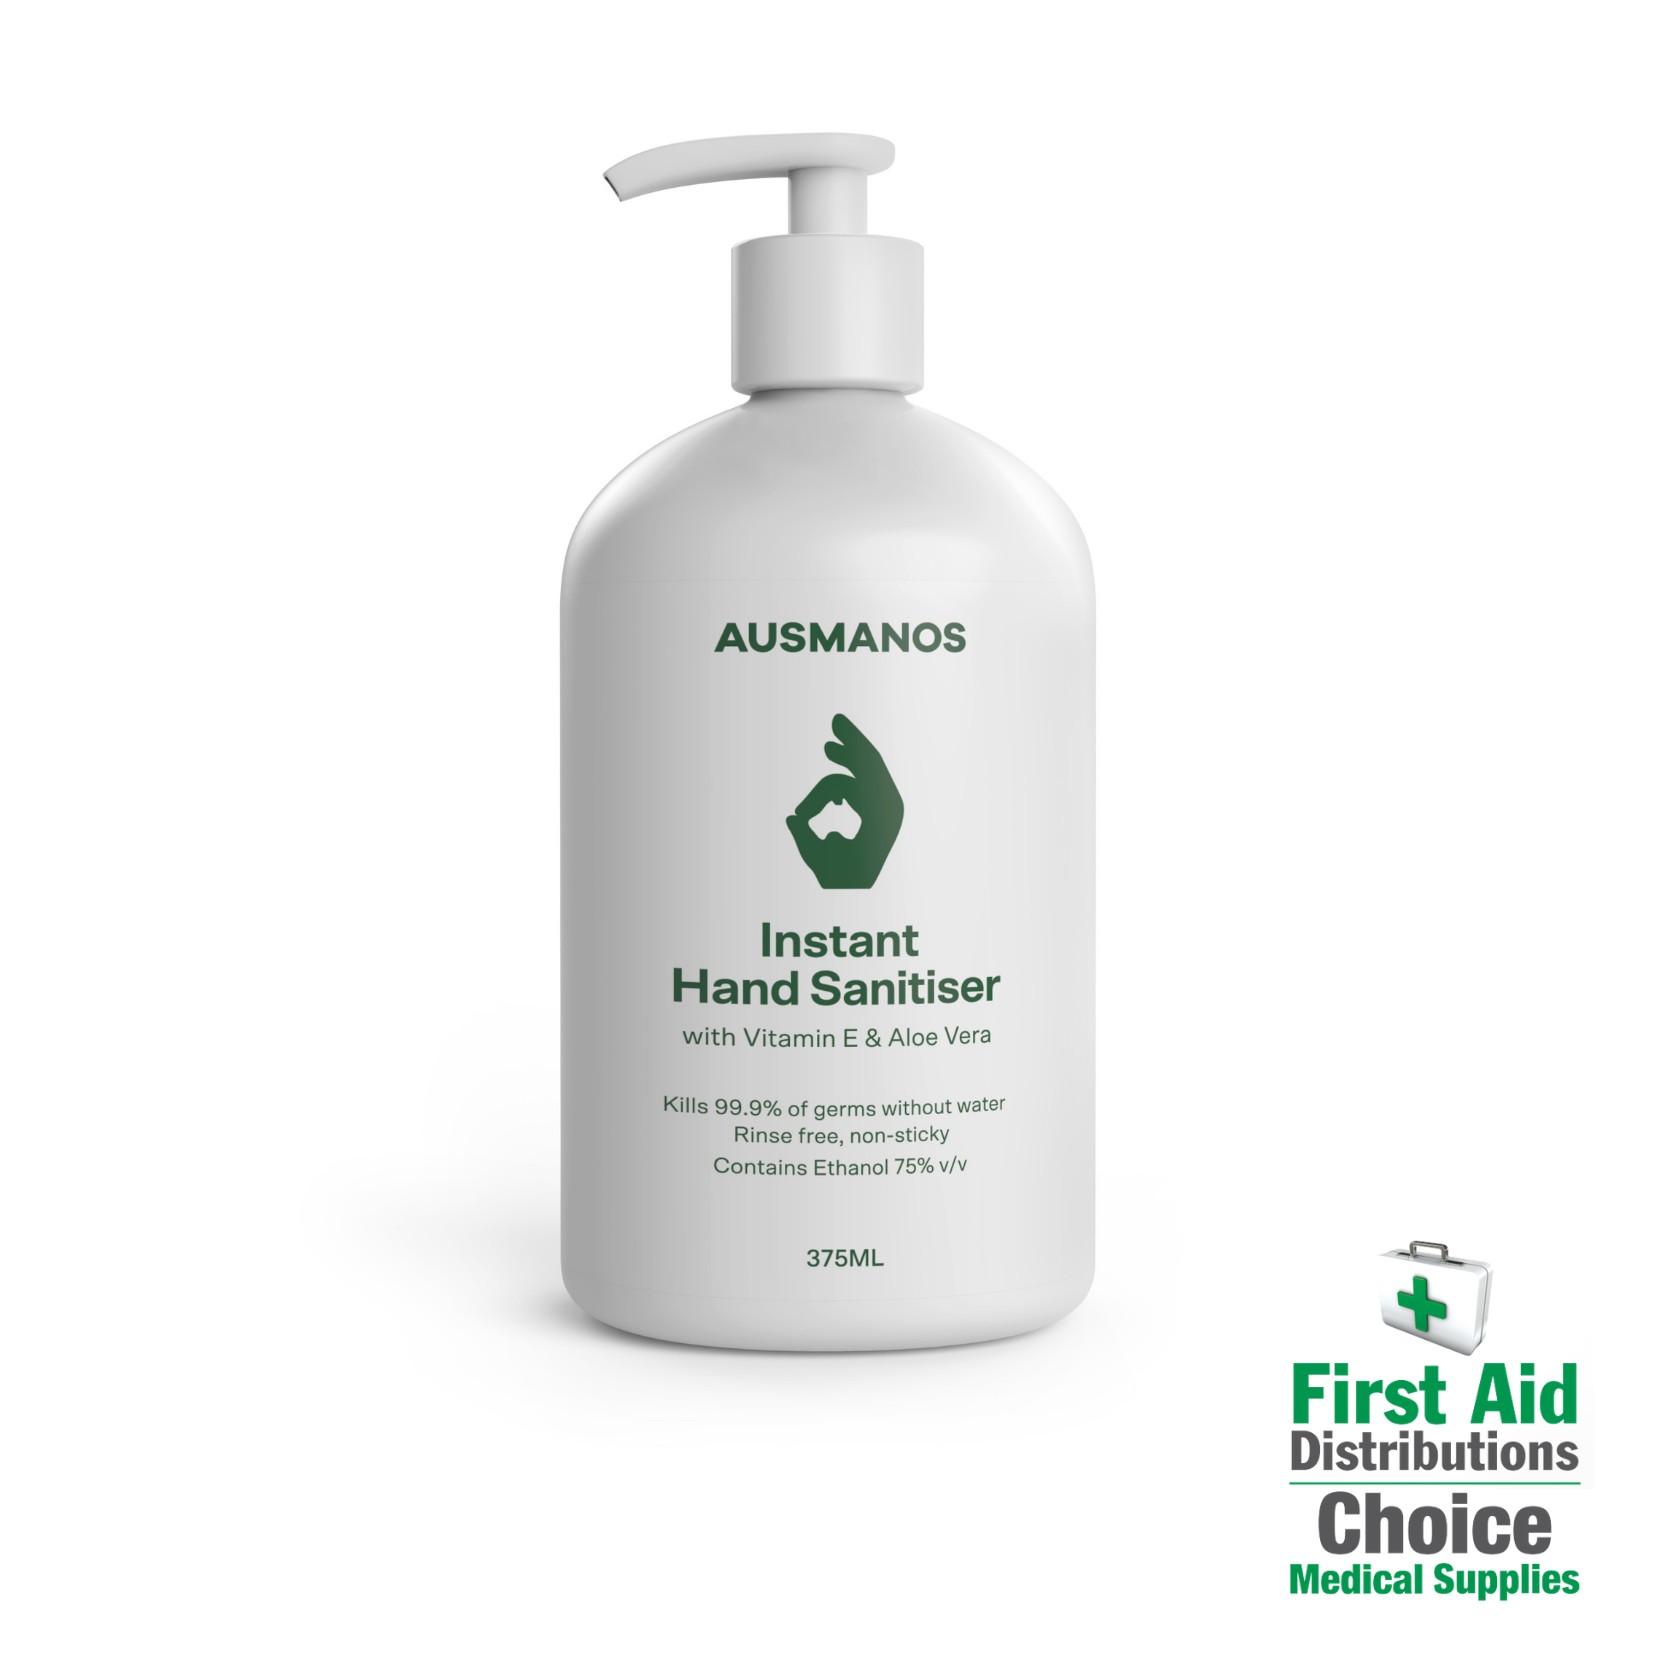 collections/Ausmanos_Hand_Sanitiser_First_Aid_Distributions.png